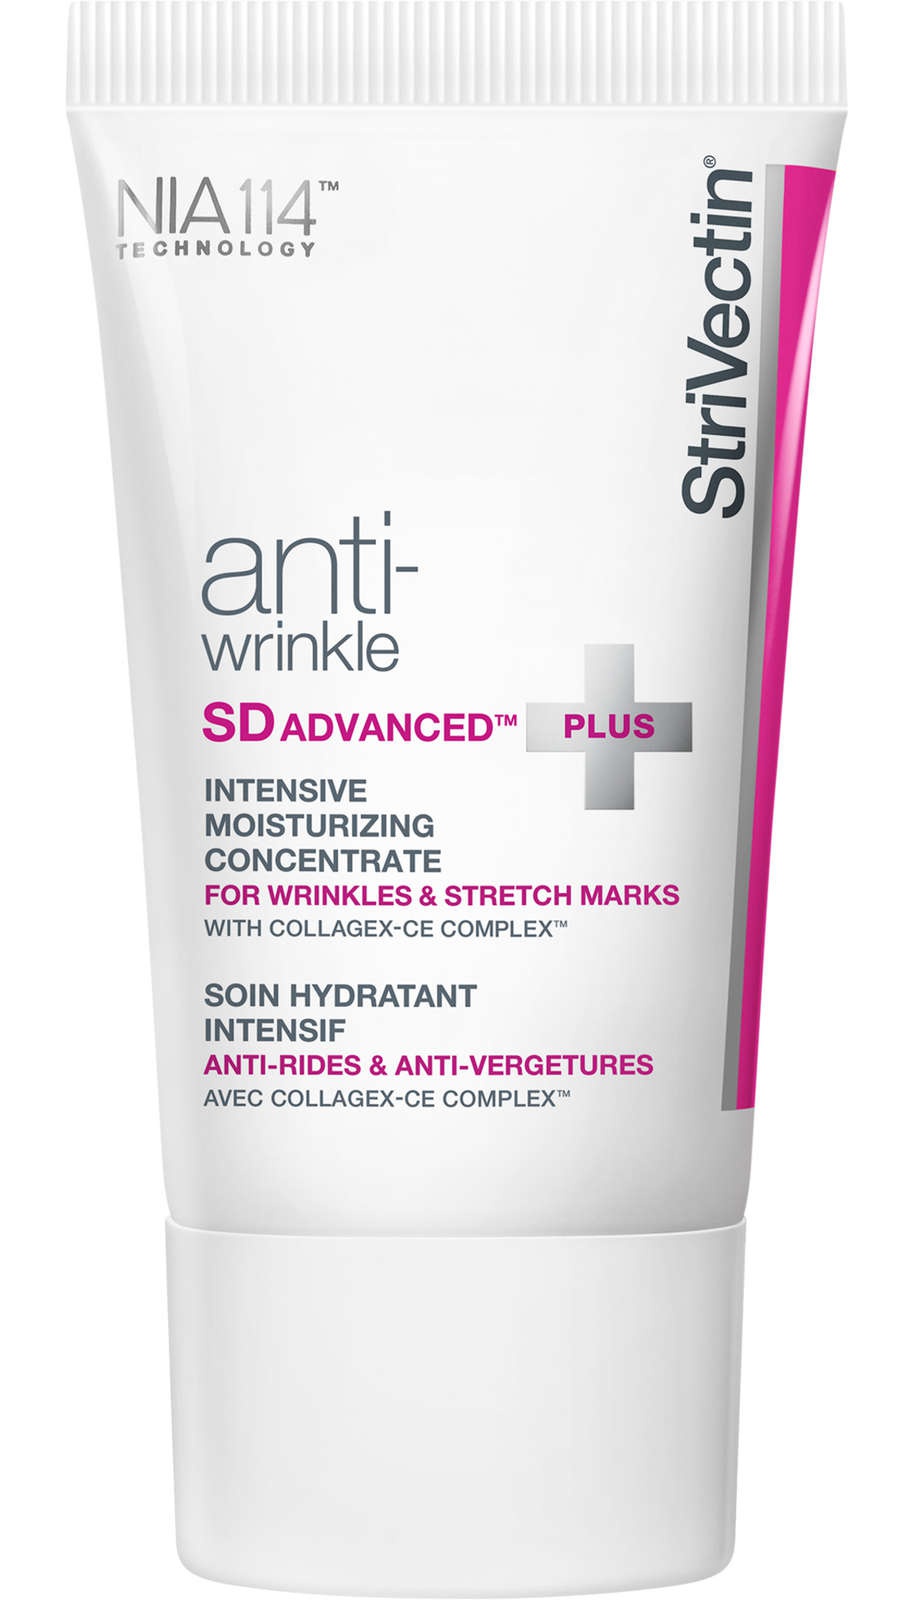 StriVectin Sd Advanced Plus Intensive Moisturizing Concentrate For Wrinkles & Stretch Marks